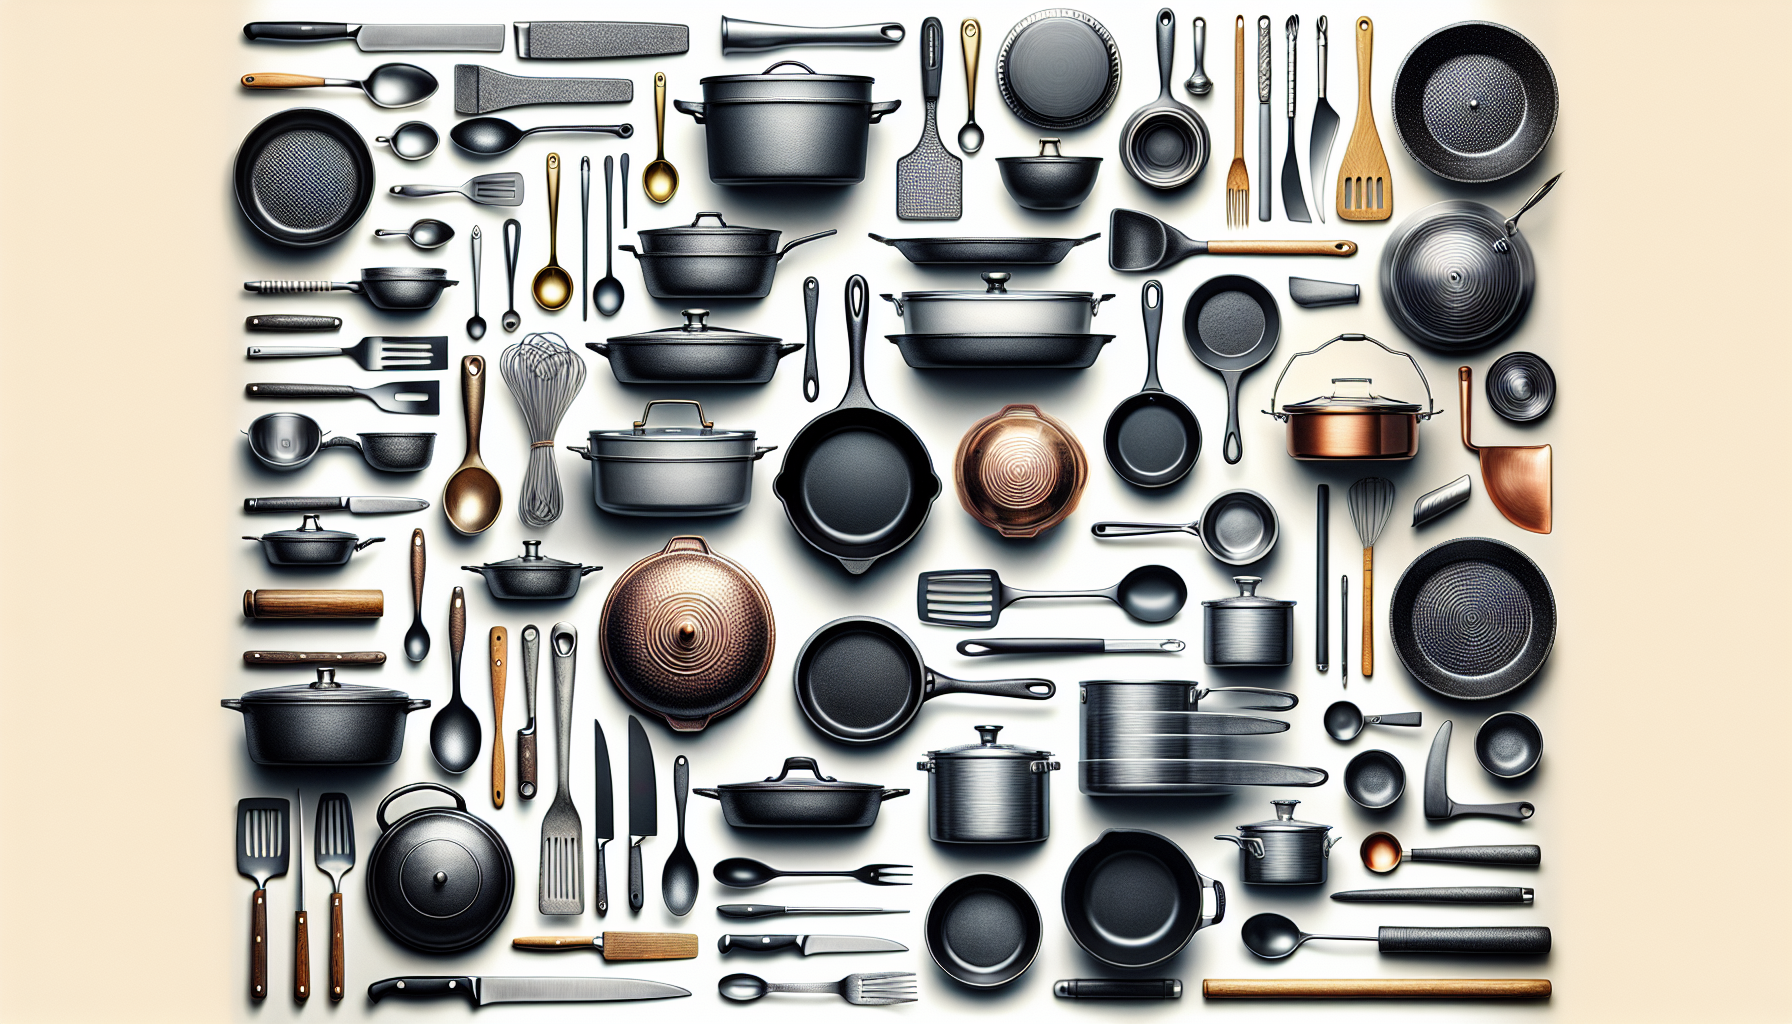 How Does The Thickness Of Cookware Affect Cooking Performance?